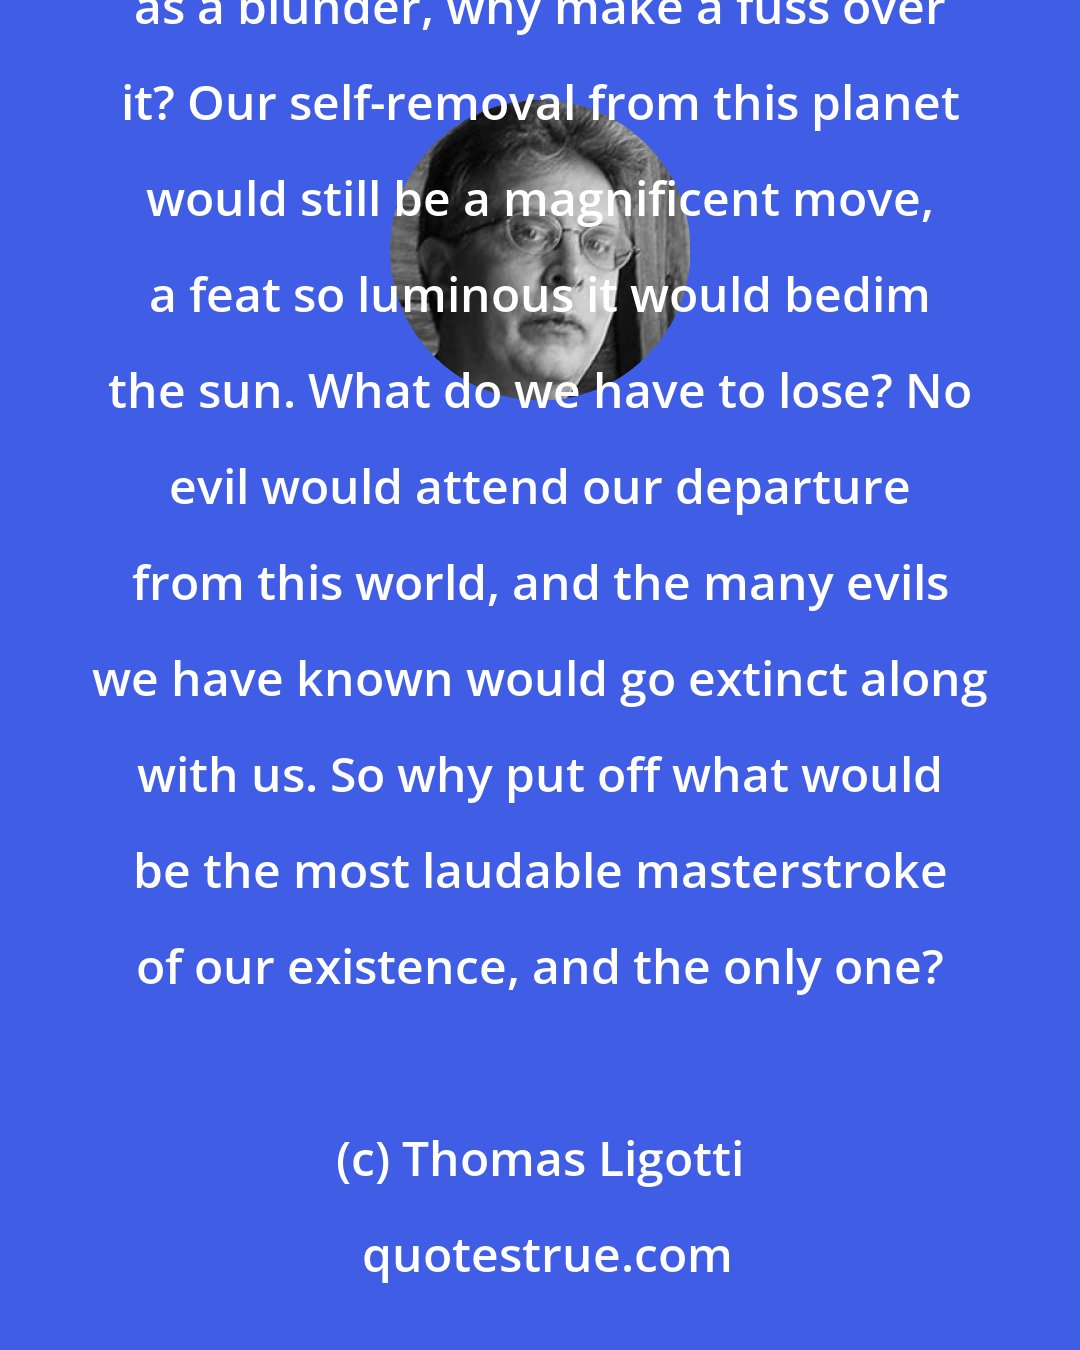 Thomas Ligotti: Nature proceeds by blunders; that is its way. It is also ours. So if we have blundered by regarding consciousness as a blunder, why make a fuss over it? Our self-removal from this planet would still be a magnificent move, a feat so luminous it would bedim the sun. What do we have to lose? No evil would attend our departure from this world, and the many evils we have known would go extinct along with us. So why put off what would be the most laudable masterstroke of our existence, and the only one?